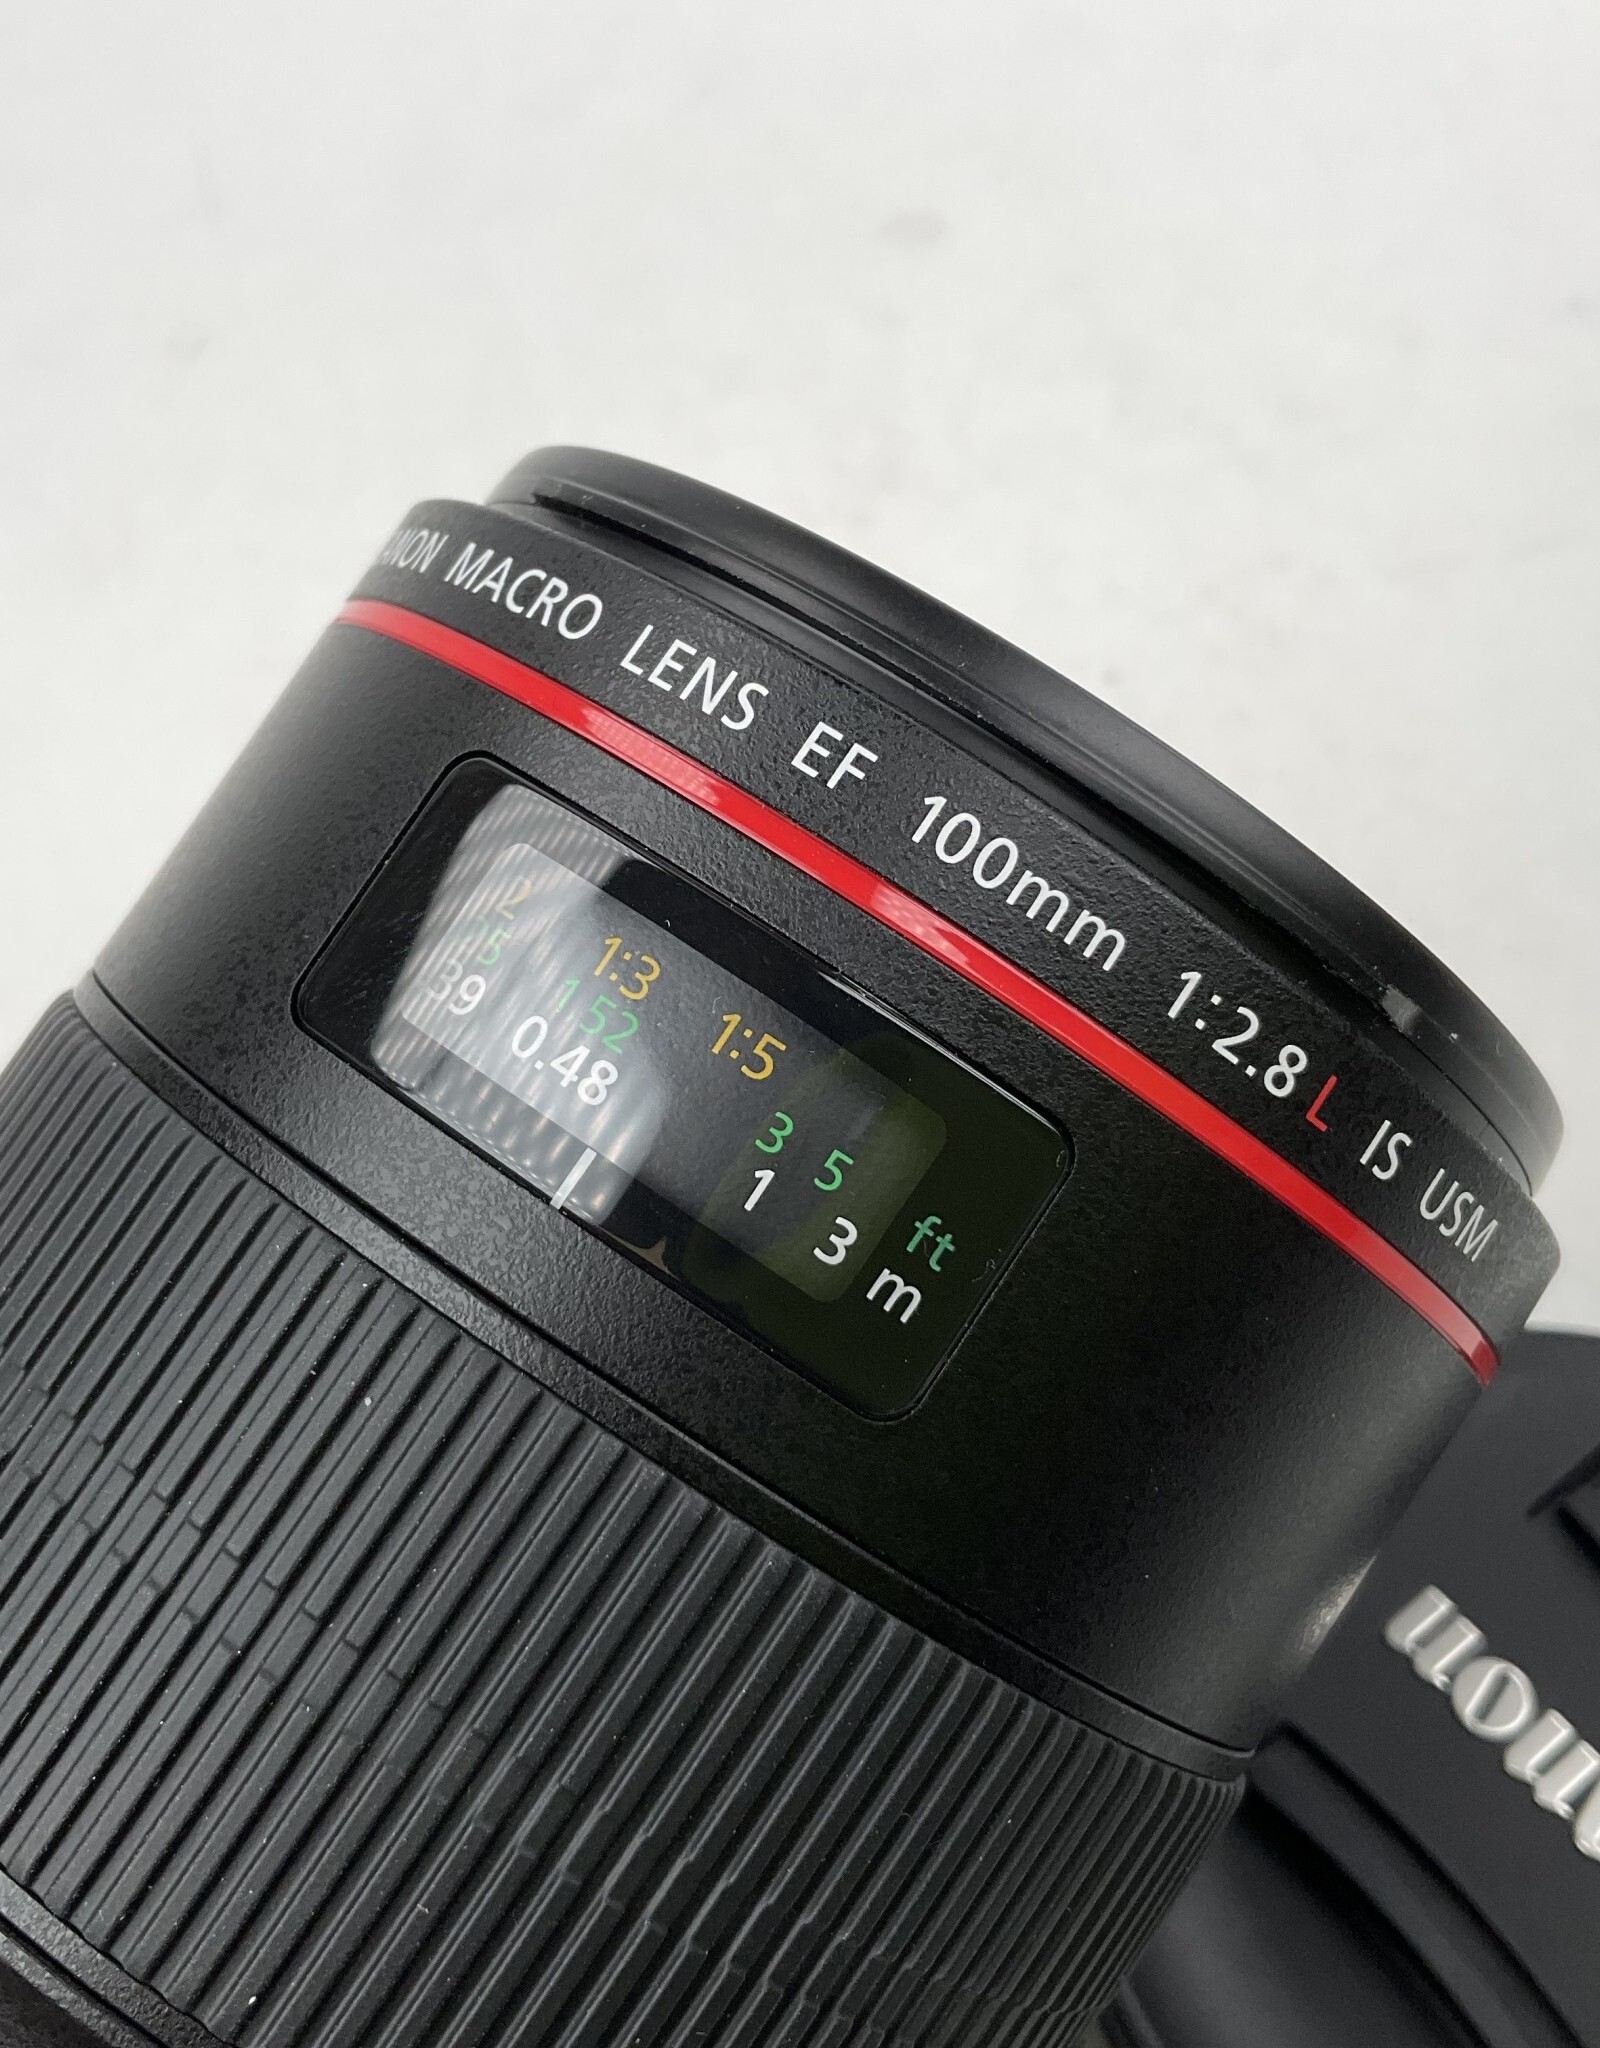 CANON Canon EF 100mm f2.8 L IS USM Lens Used EX